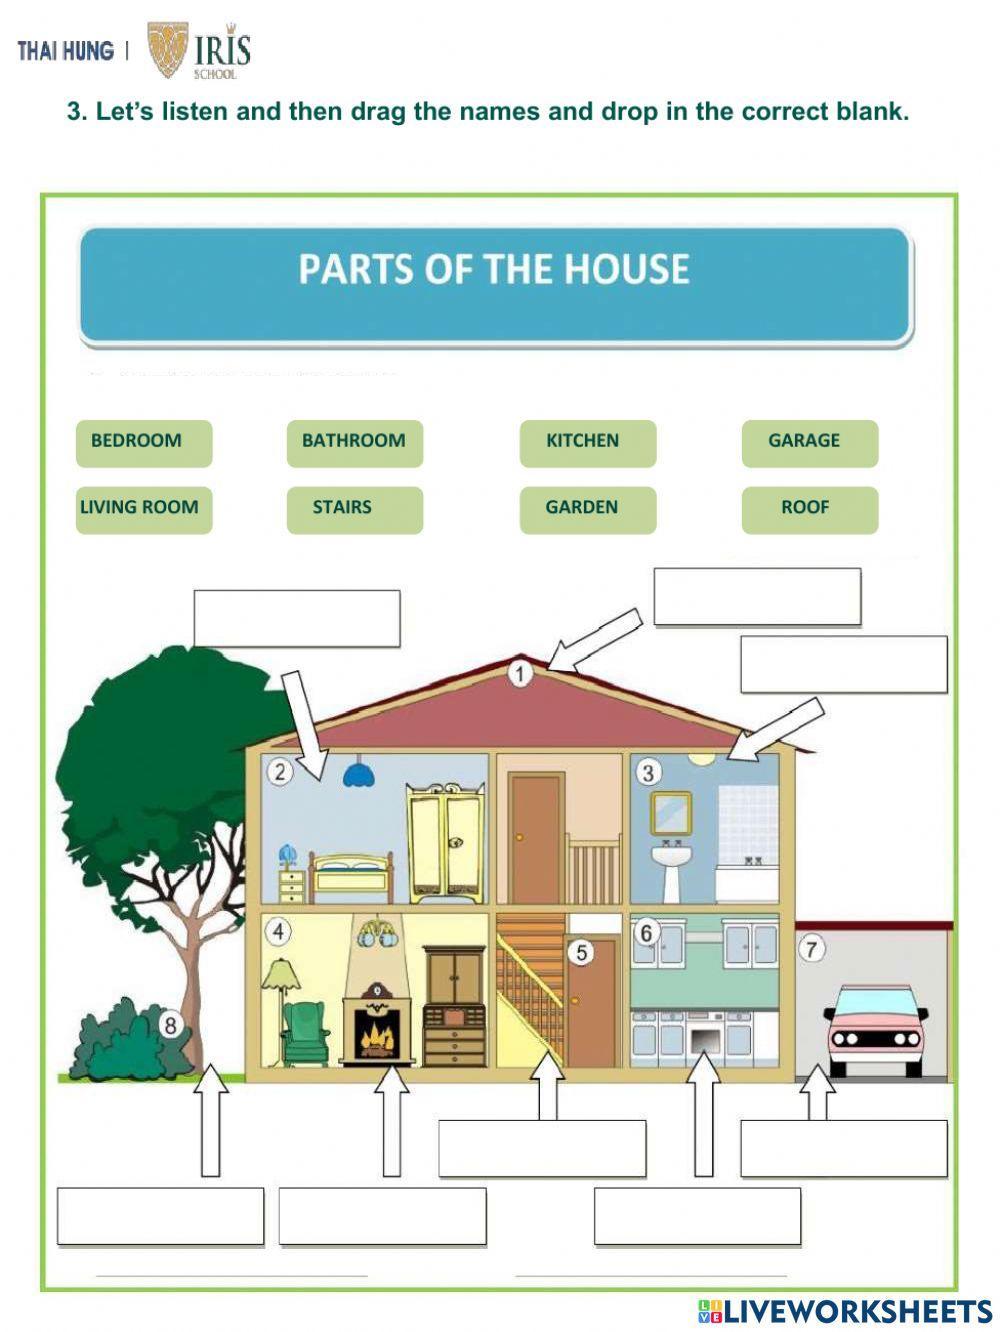 Sunny-Worksheet about parts of the house